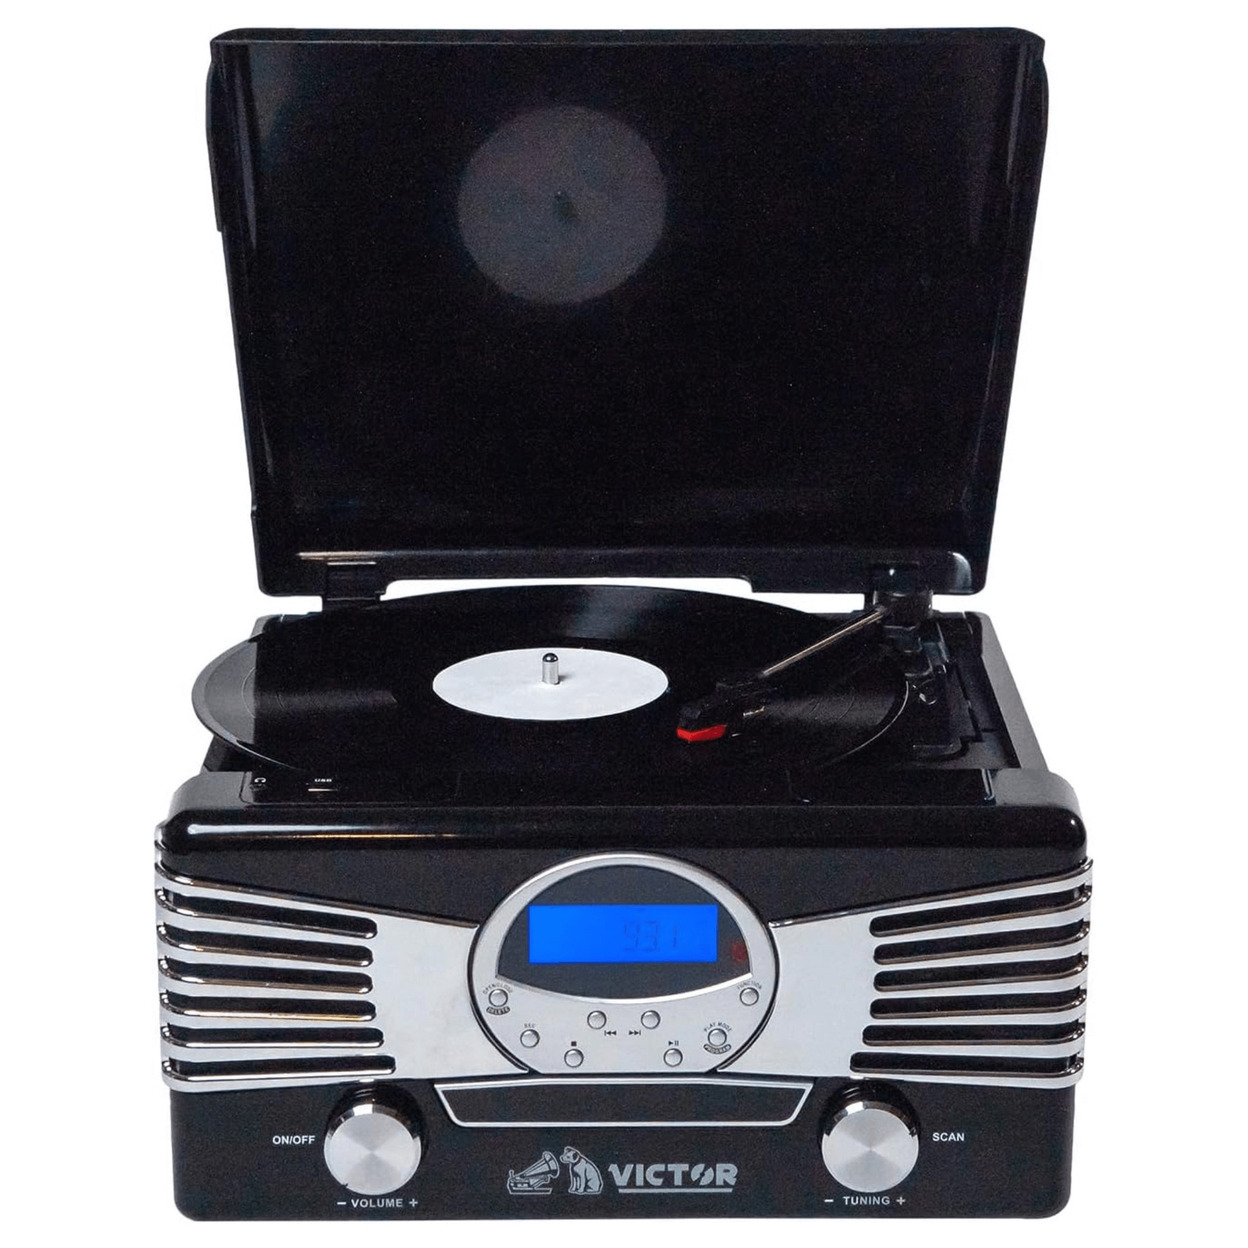 Victor Diner 7-in-1 Turntable Music Center With CD & MP3 Player And Bluetooth Function - Black